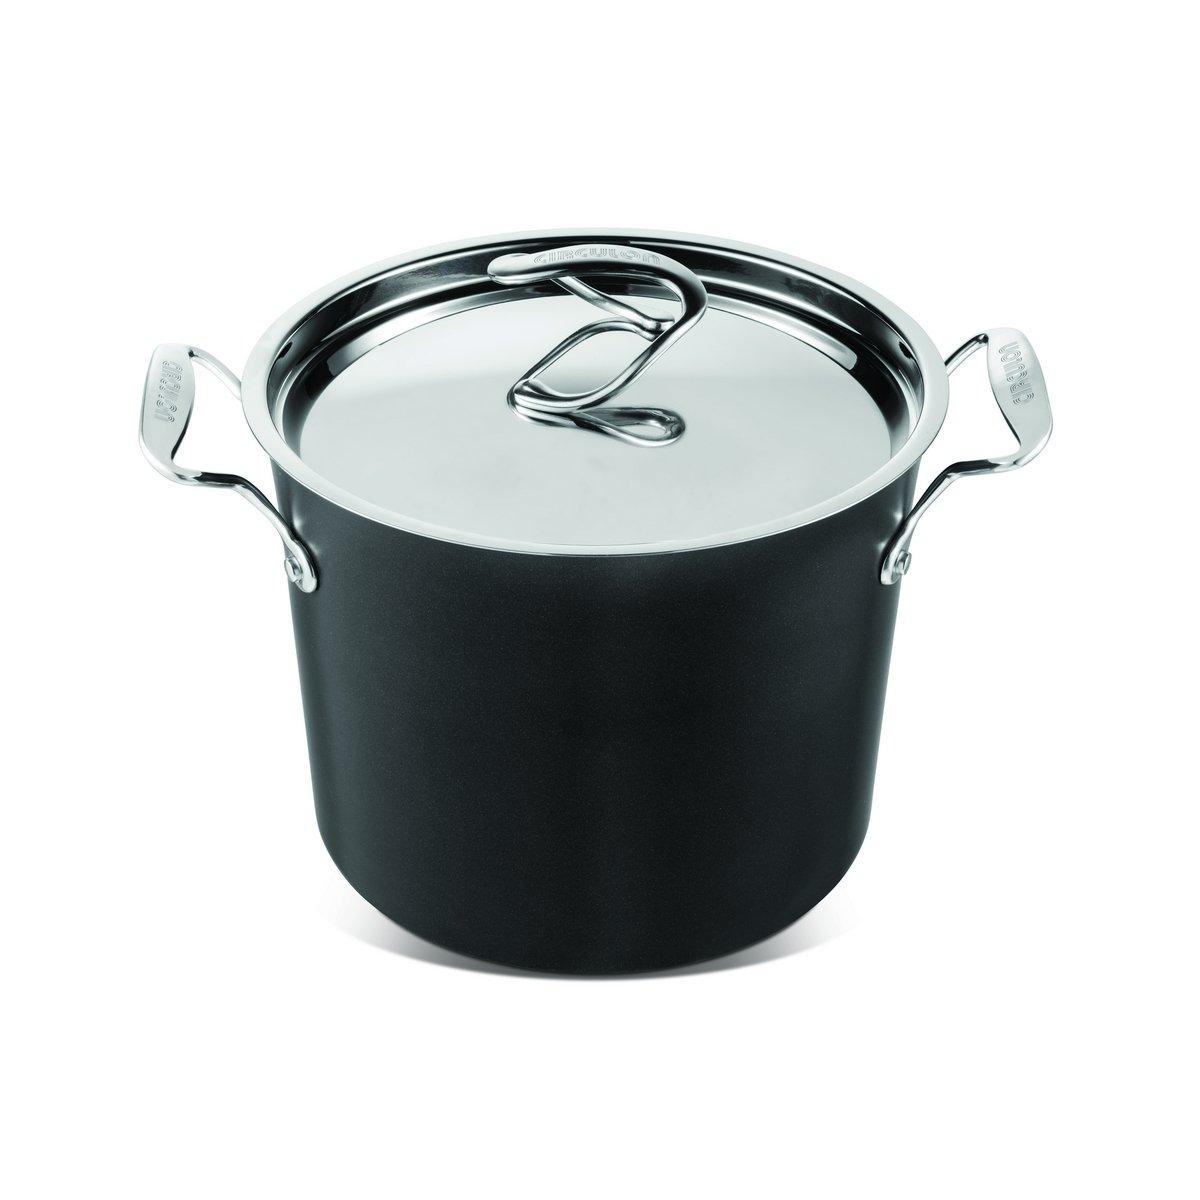 Style Stockpot with Lid Dishwasher Safe Non Stick Cookware - 24 cm